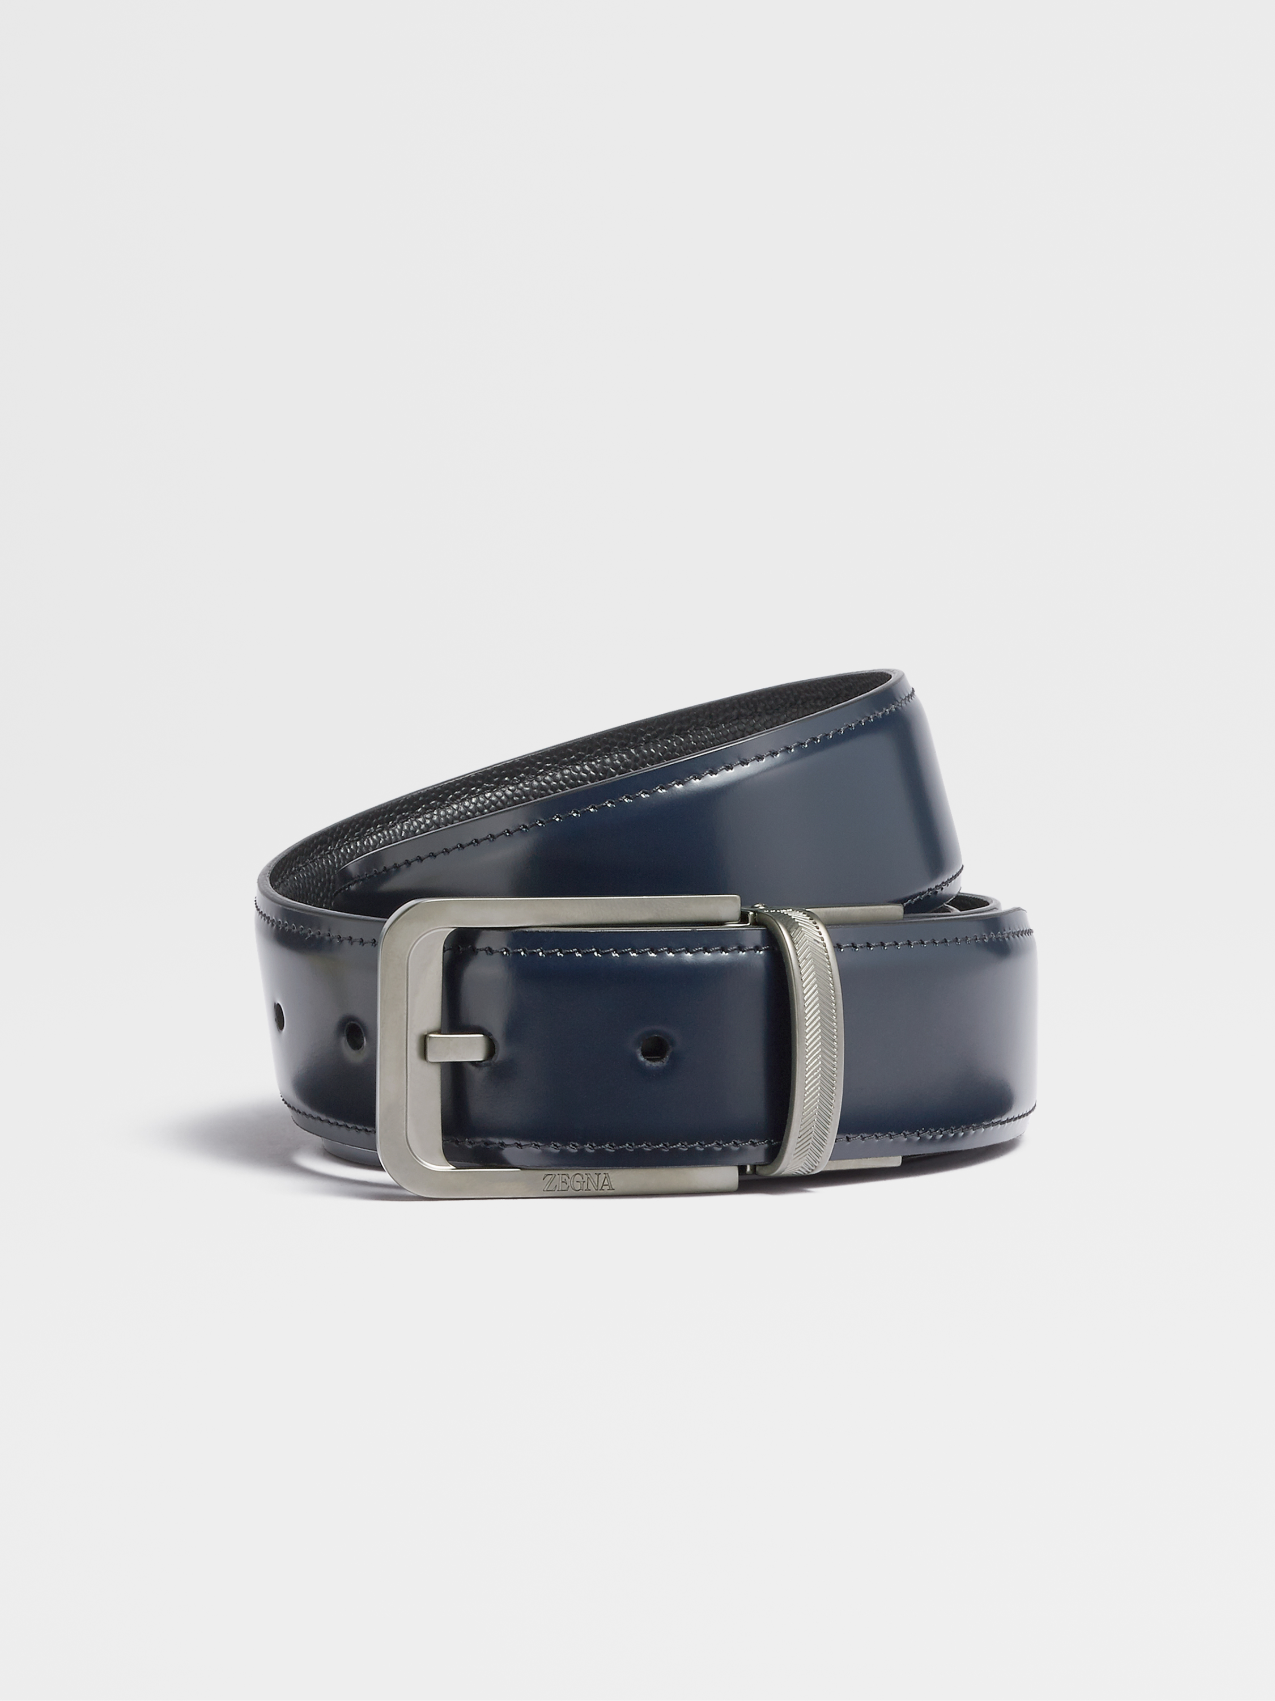 Blue Shiny Smooth Leather and Black Engraved Leather Reversible Belt